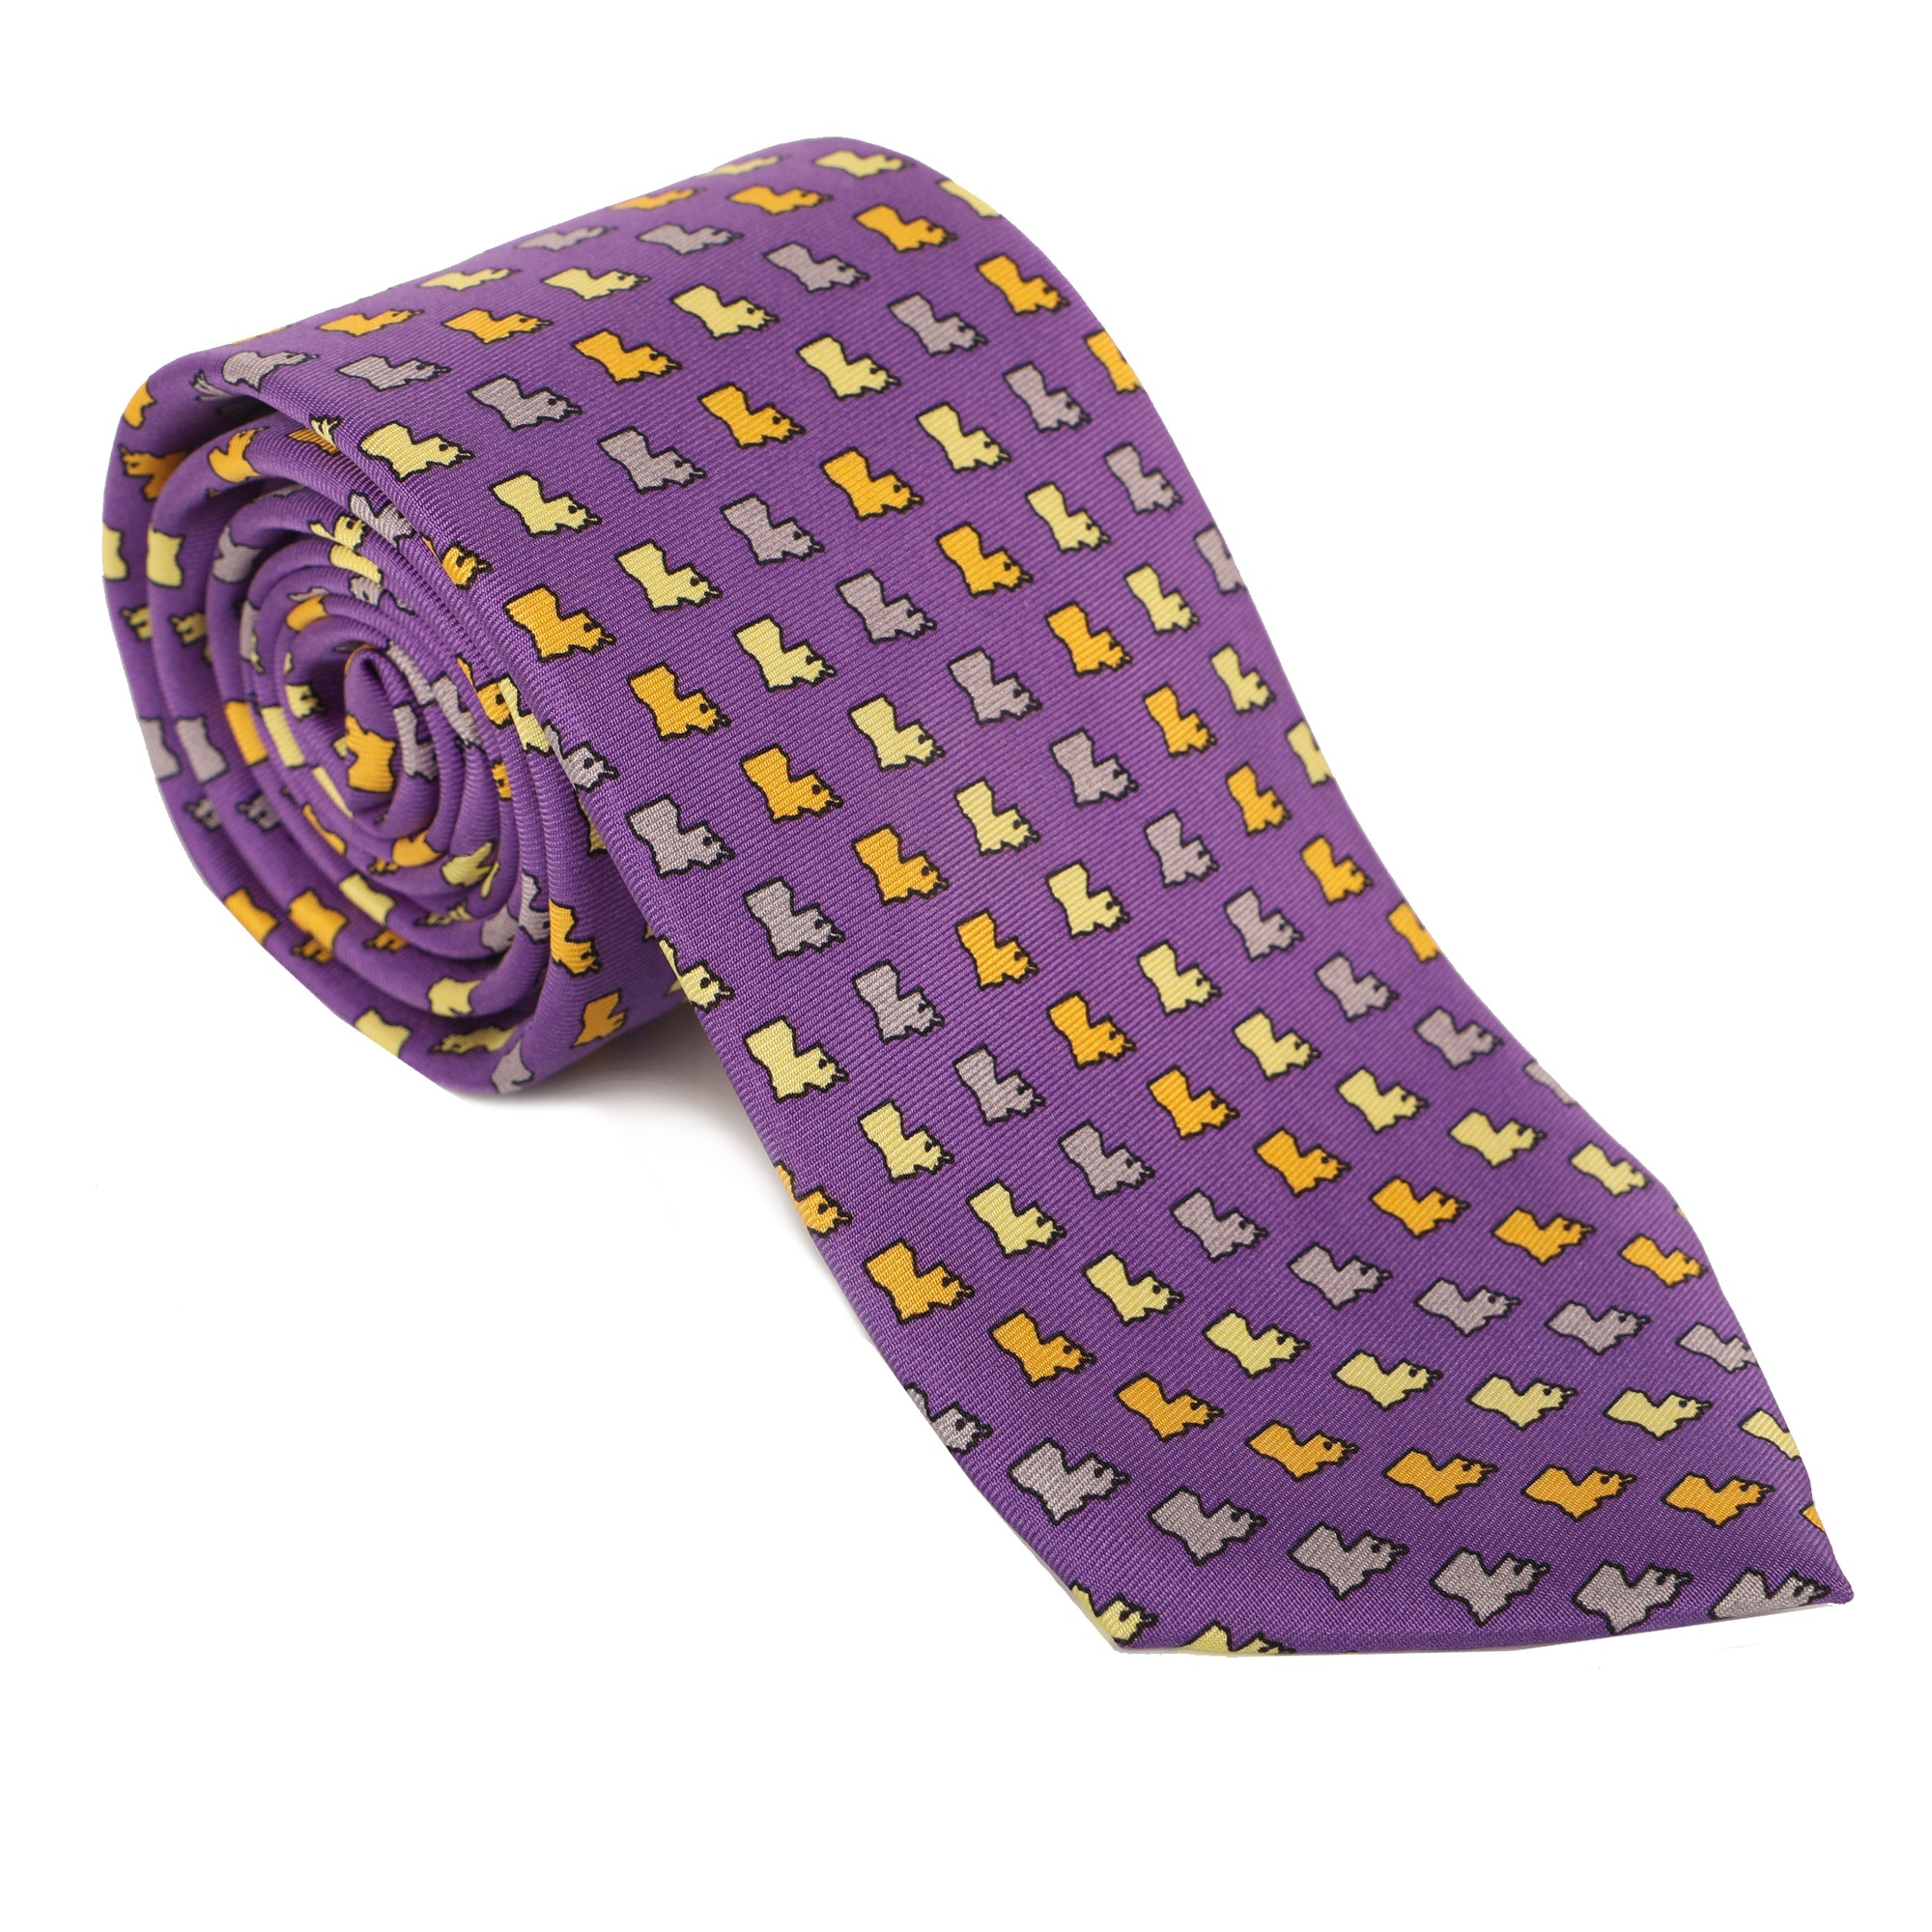 Represent like royalty in our regal 100% silk ties. Purple & gold and good to geaux (go)! Tie one on so you can tie one on!  Limited Edition Haspel x NOLA Couture Exclusive Collaboration  •  100% Silk  •  3" Wide  •  Seersucker Tipped and Seersucker Keeper  •  Made in USA